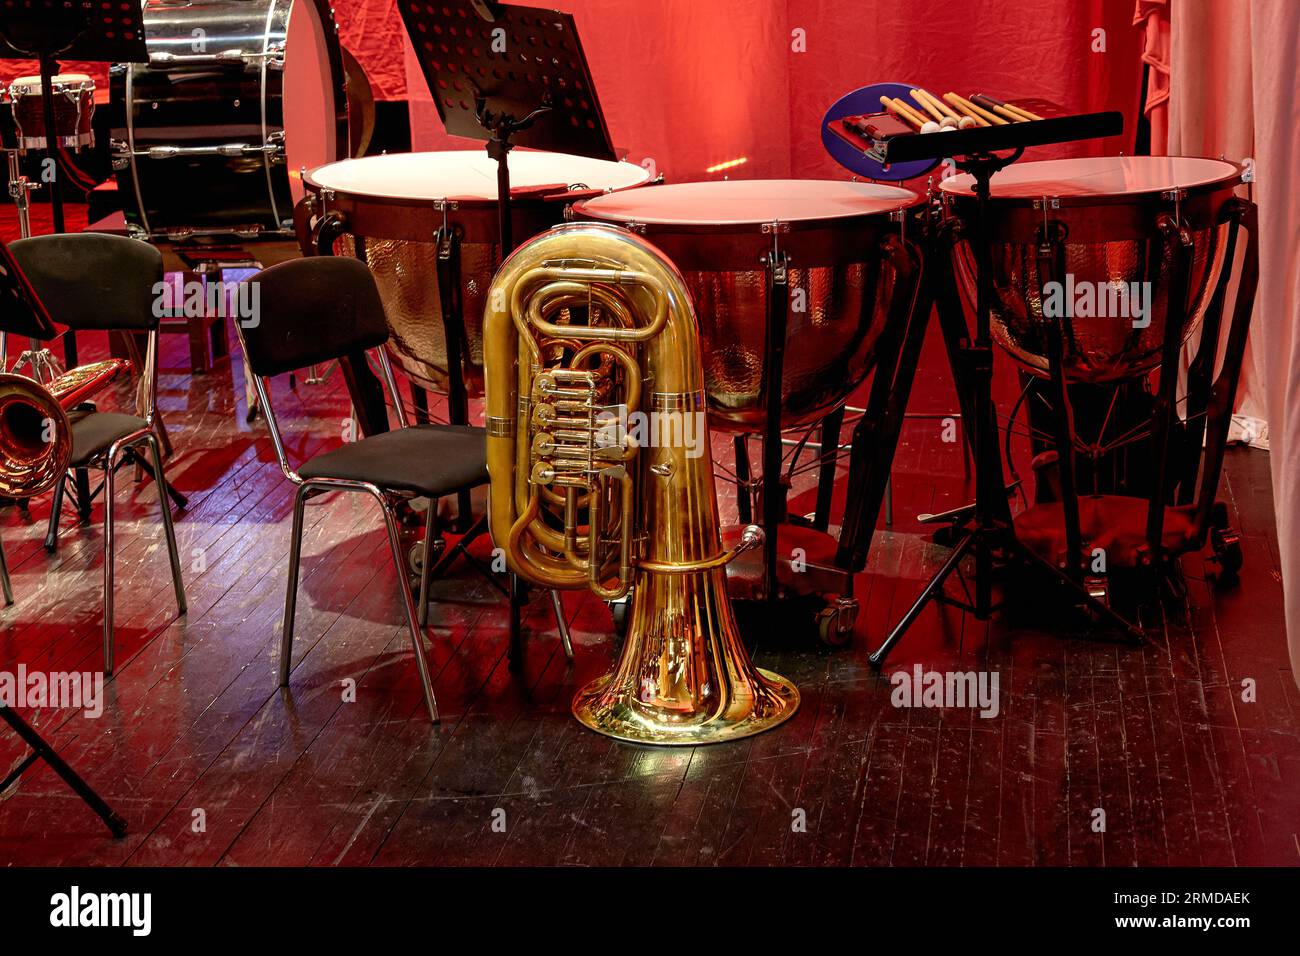 Image of tuba and timpani of a symphony orchestra stand on stage Stock Photo